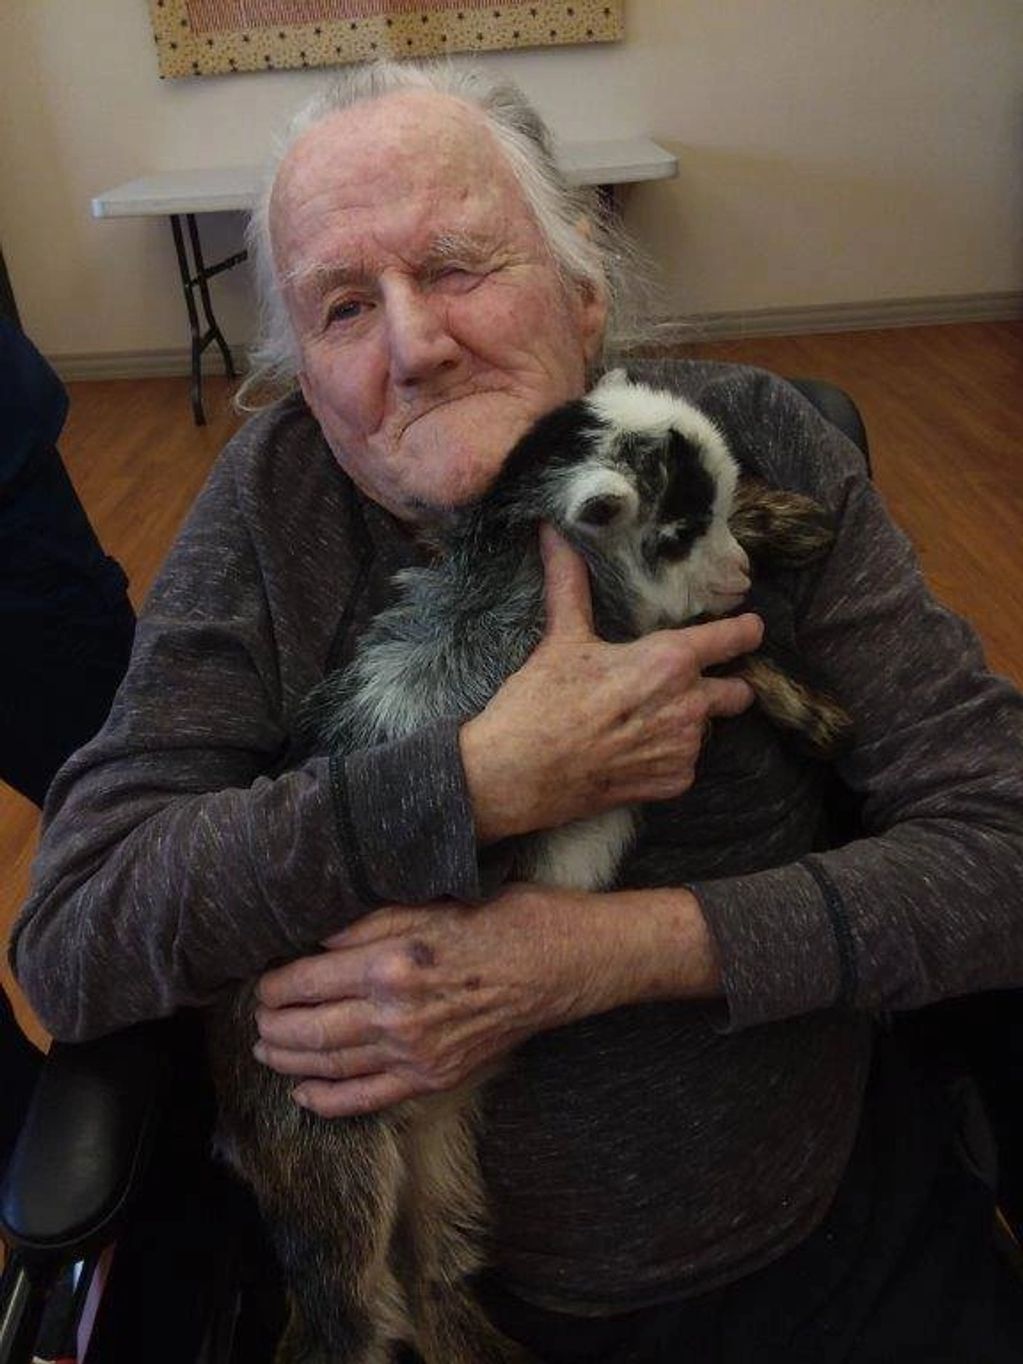 Nursing home resident cuddling & holding one of our bottle baby goats during animal therapy in 2019.